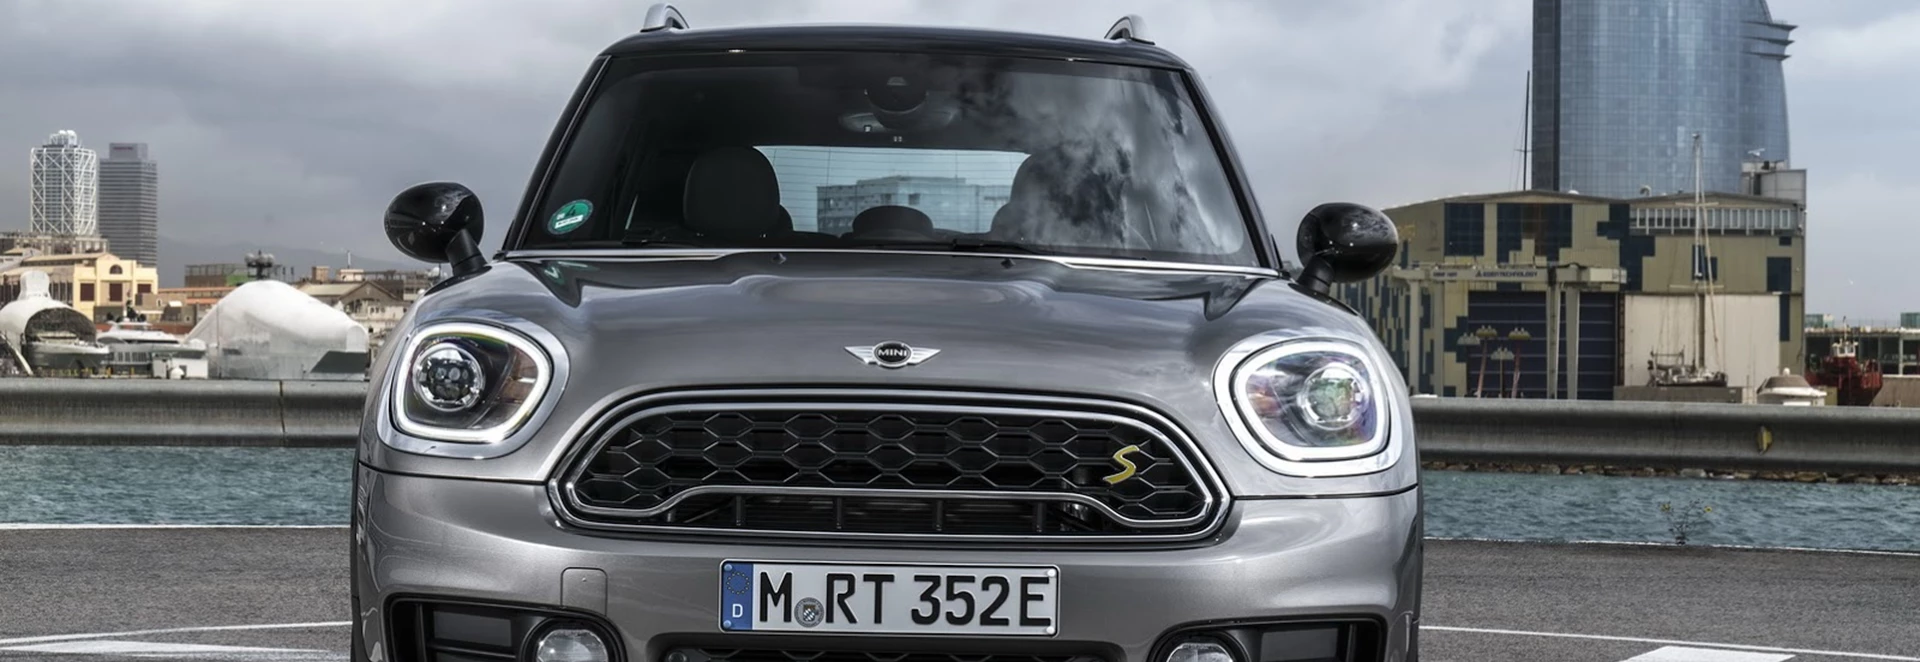 MINI’s first plug-in hybrid launches in the UK this June